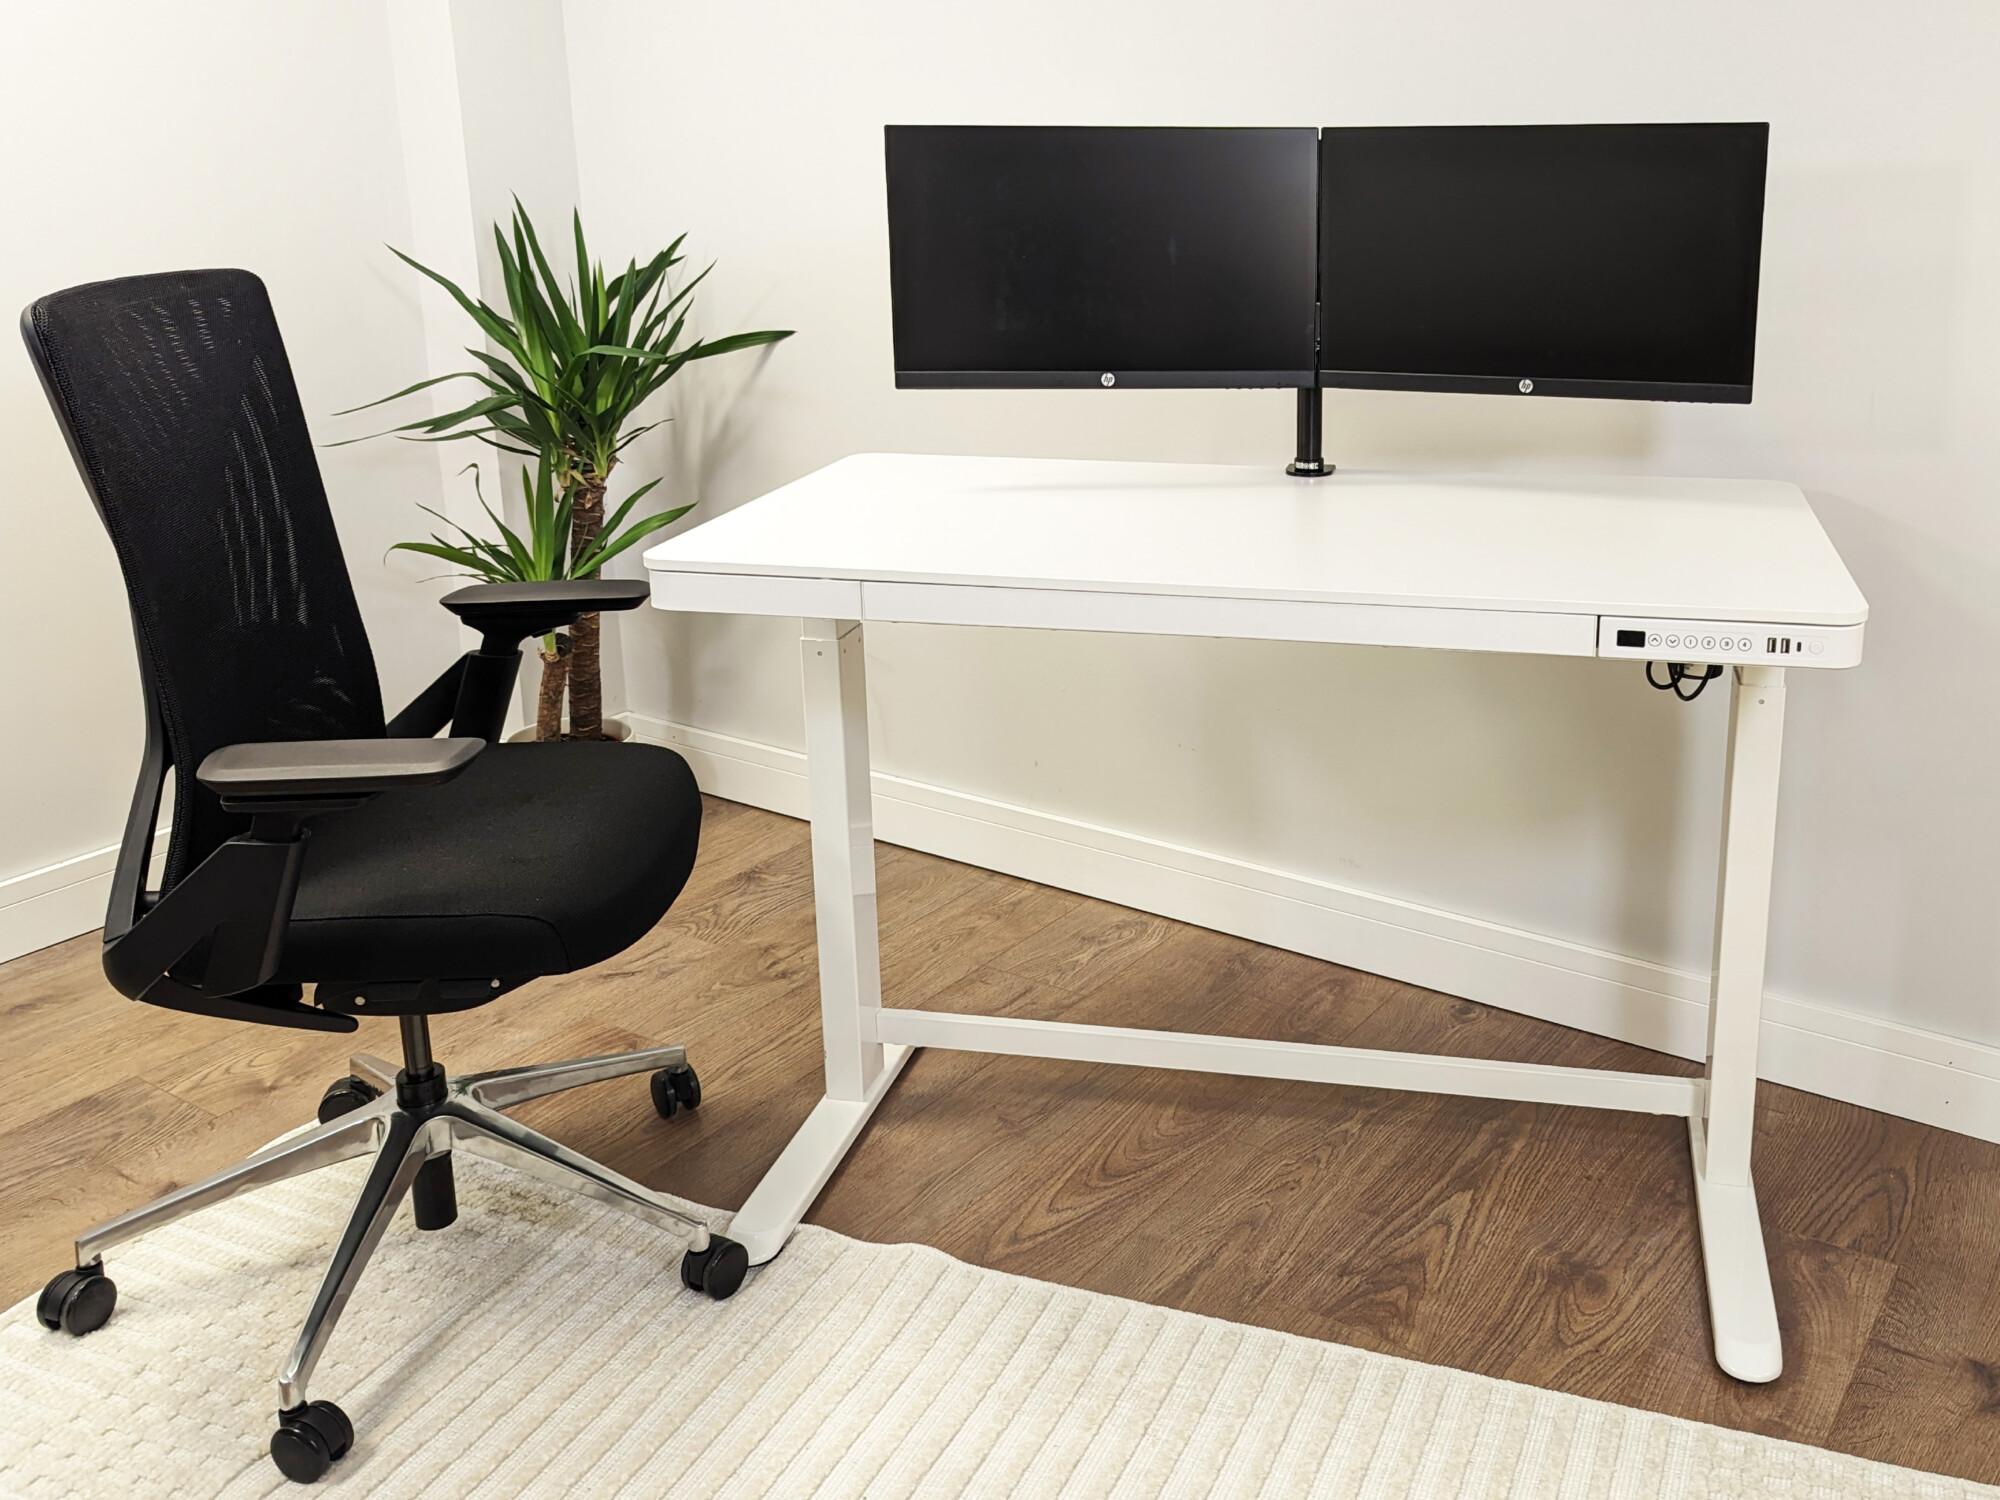 The ORKA range with MFC desktops allow for monitor mounting